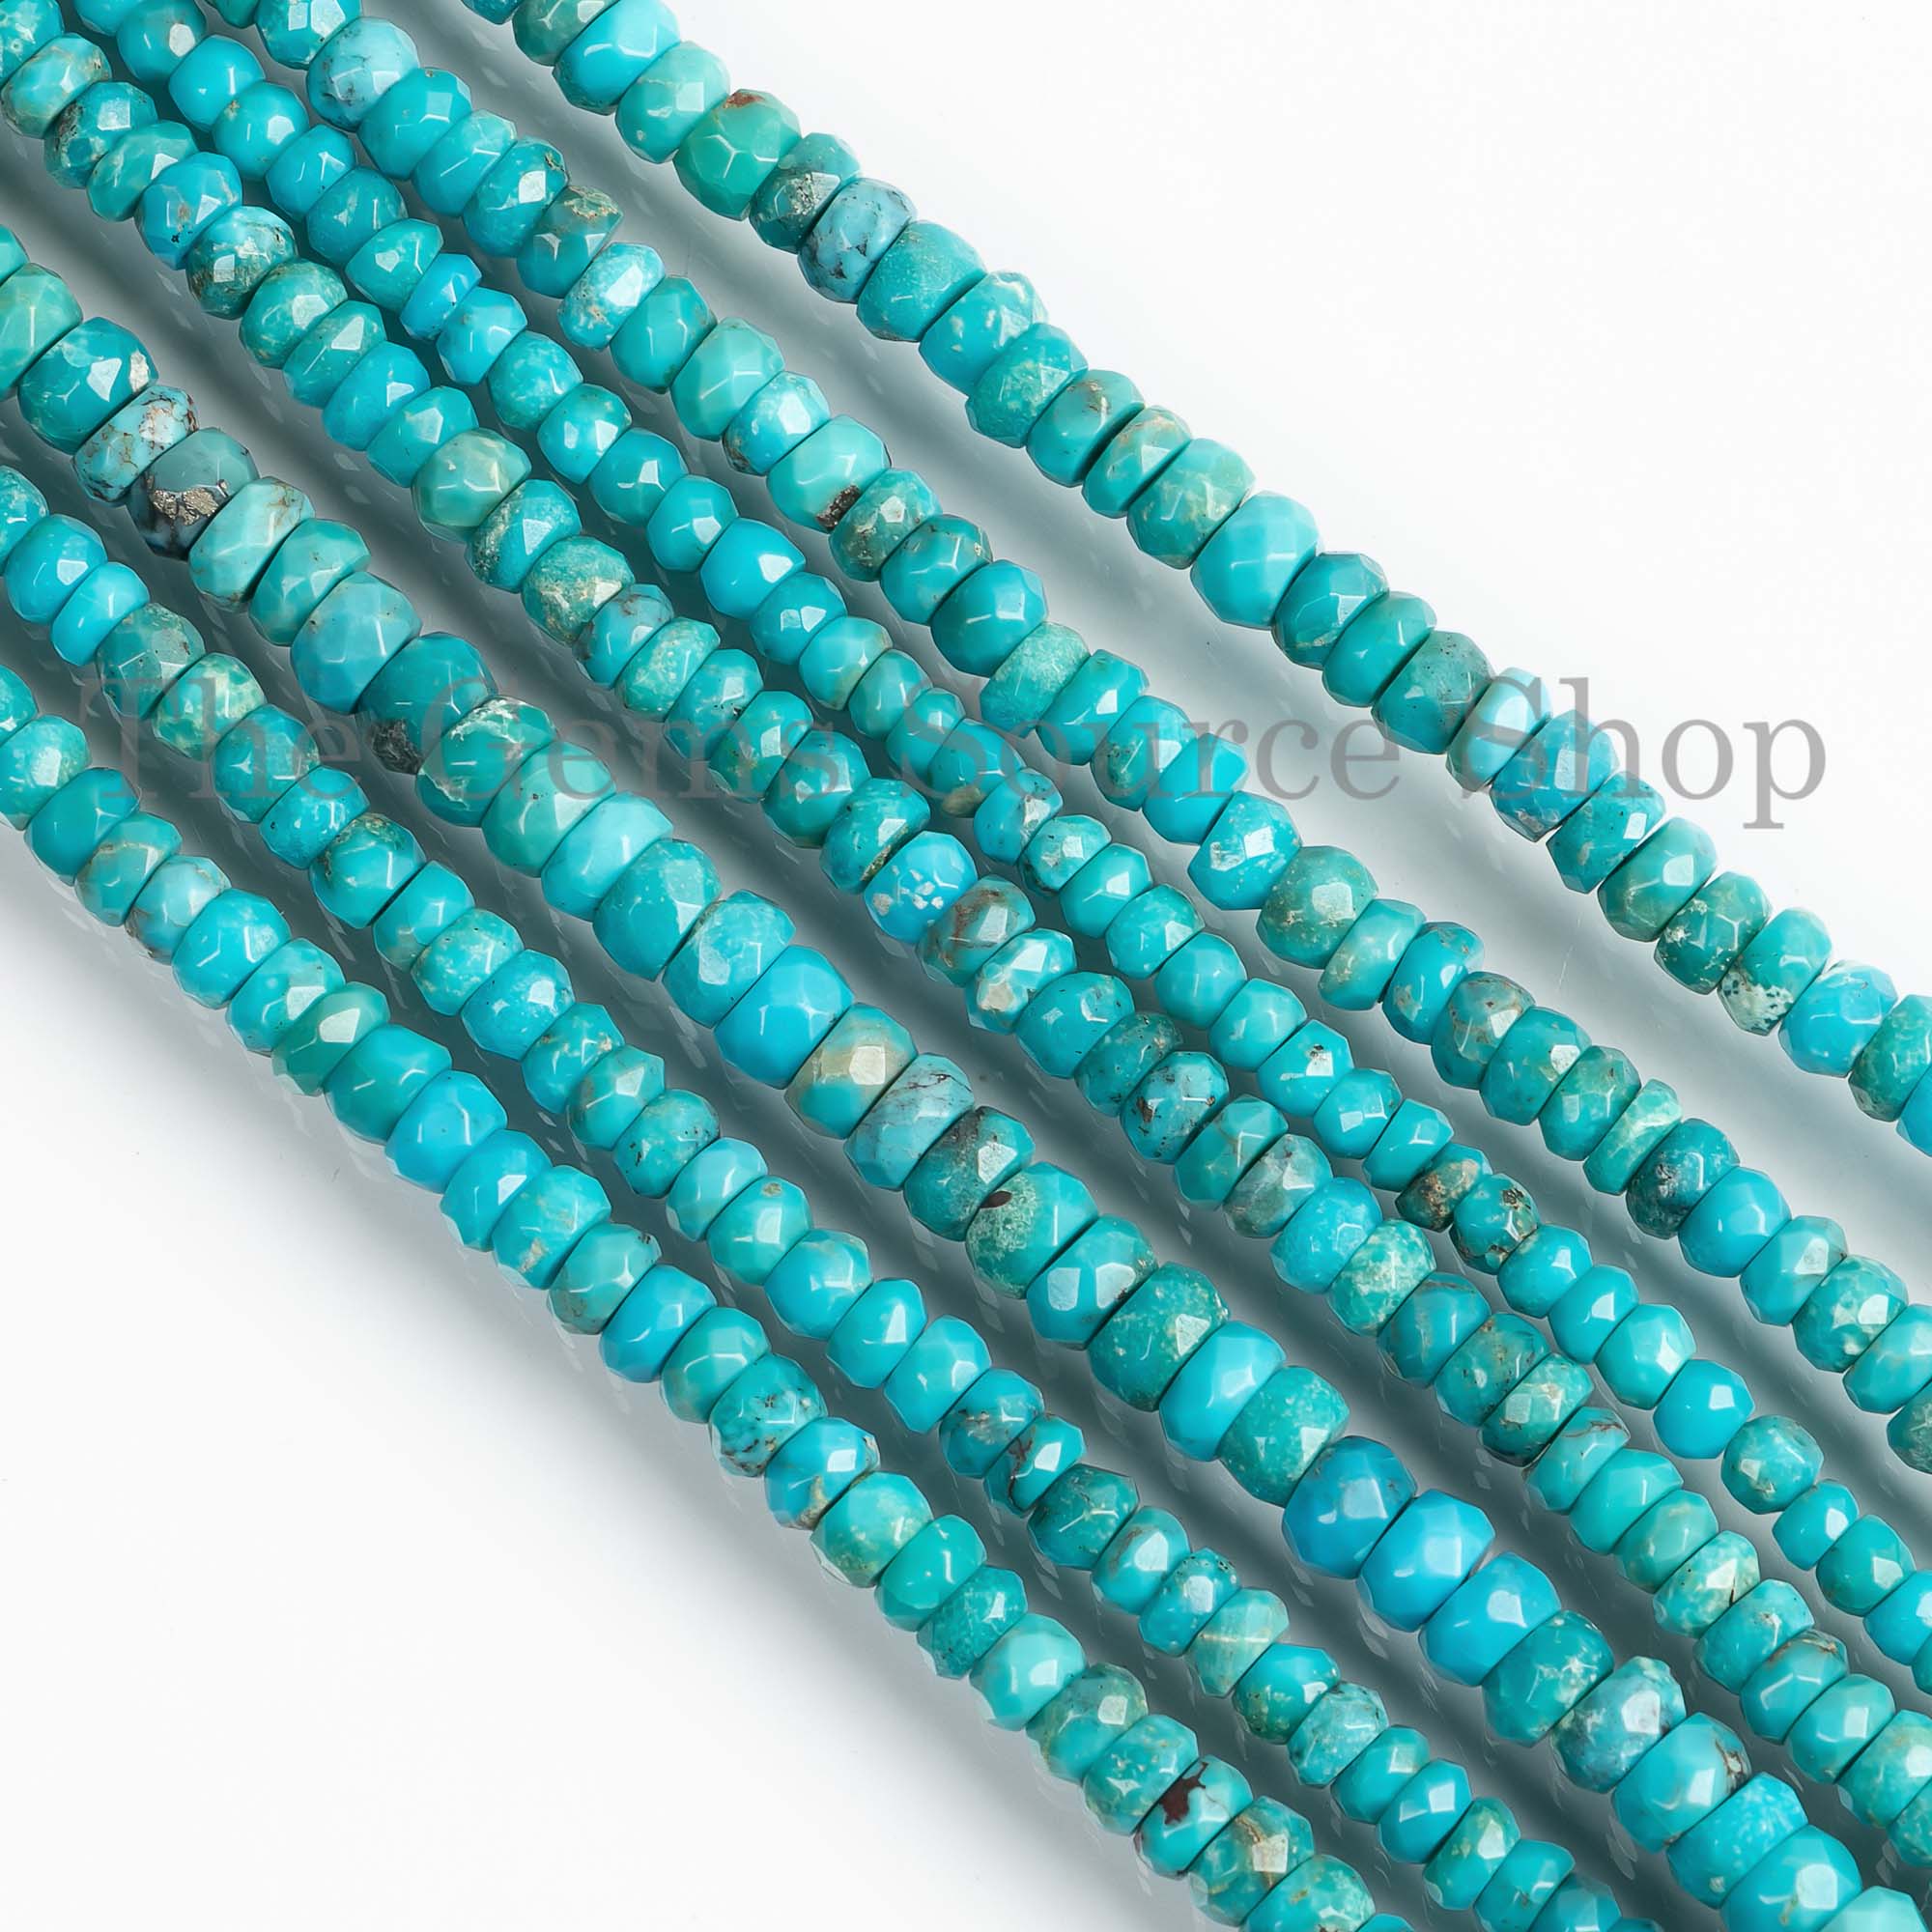  Turquoise Faceted Beads